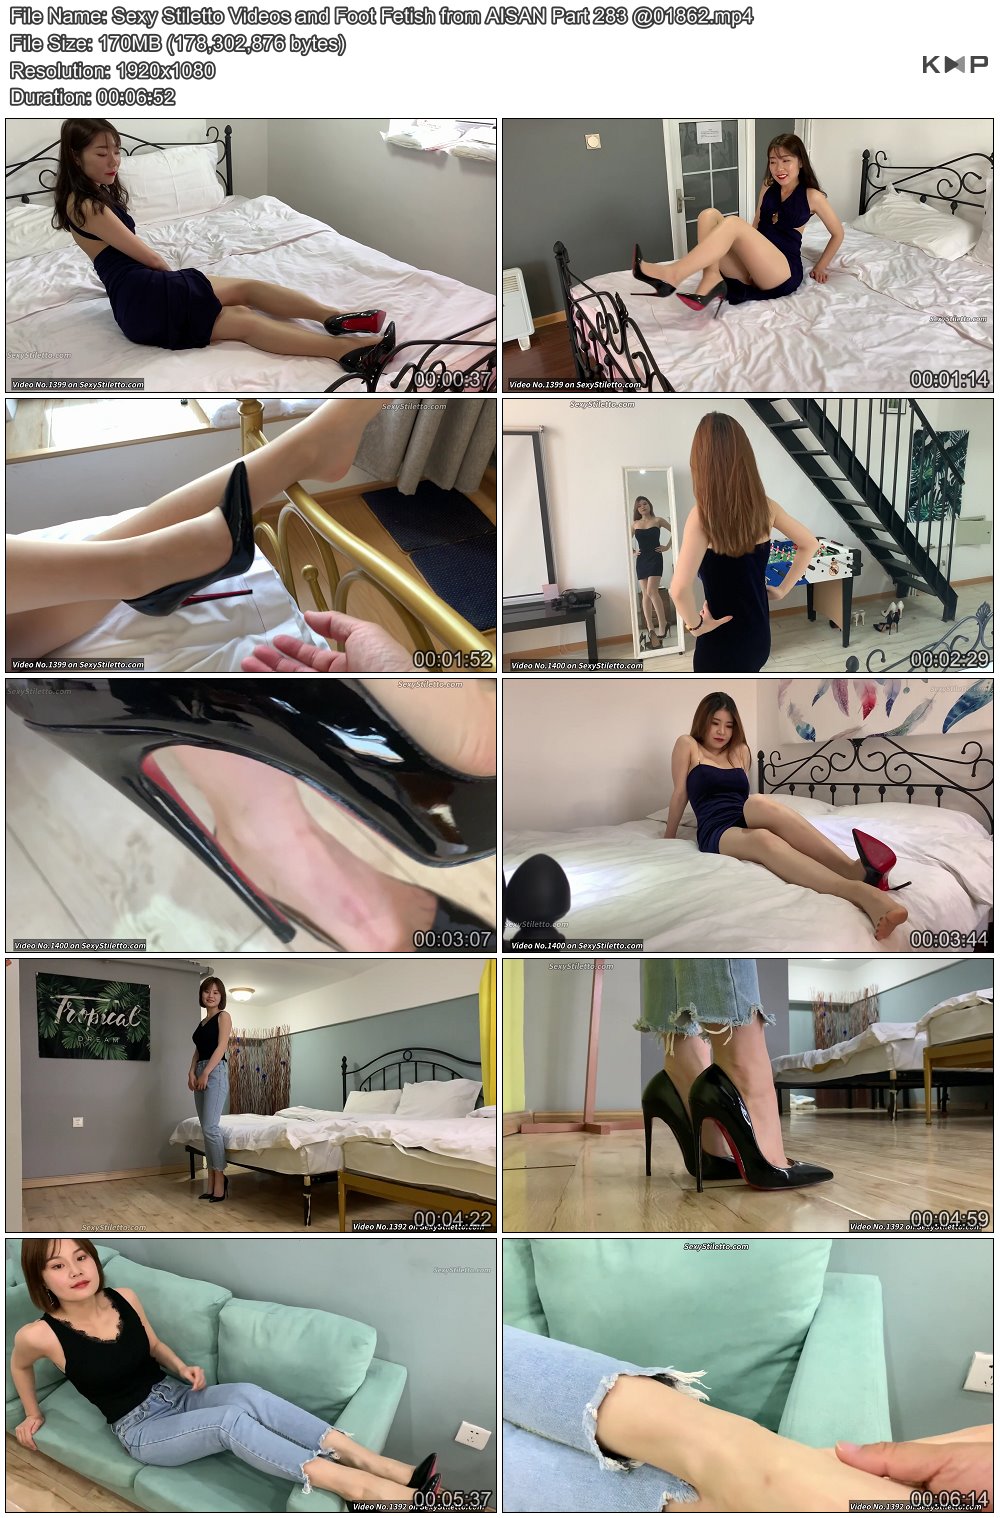 Sexy Stiletto Videos and Foot Fetish from AISAN Part 283 @01862.JPG